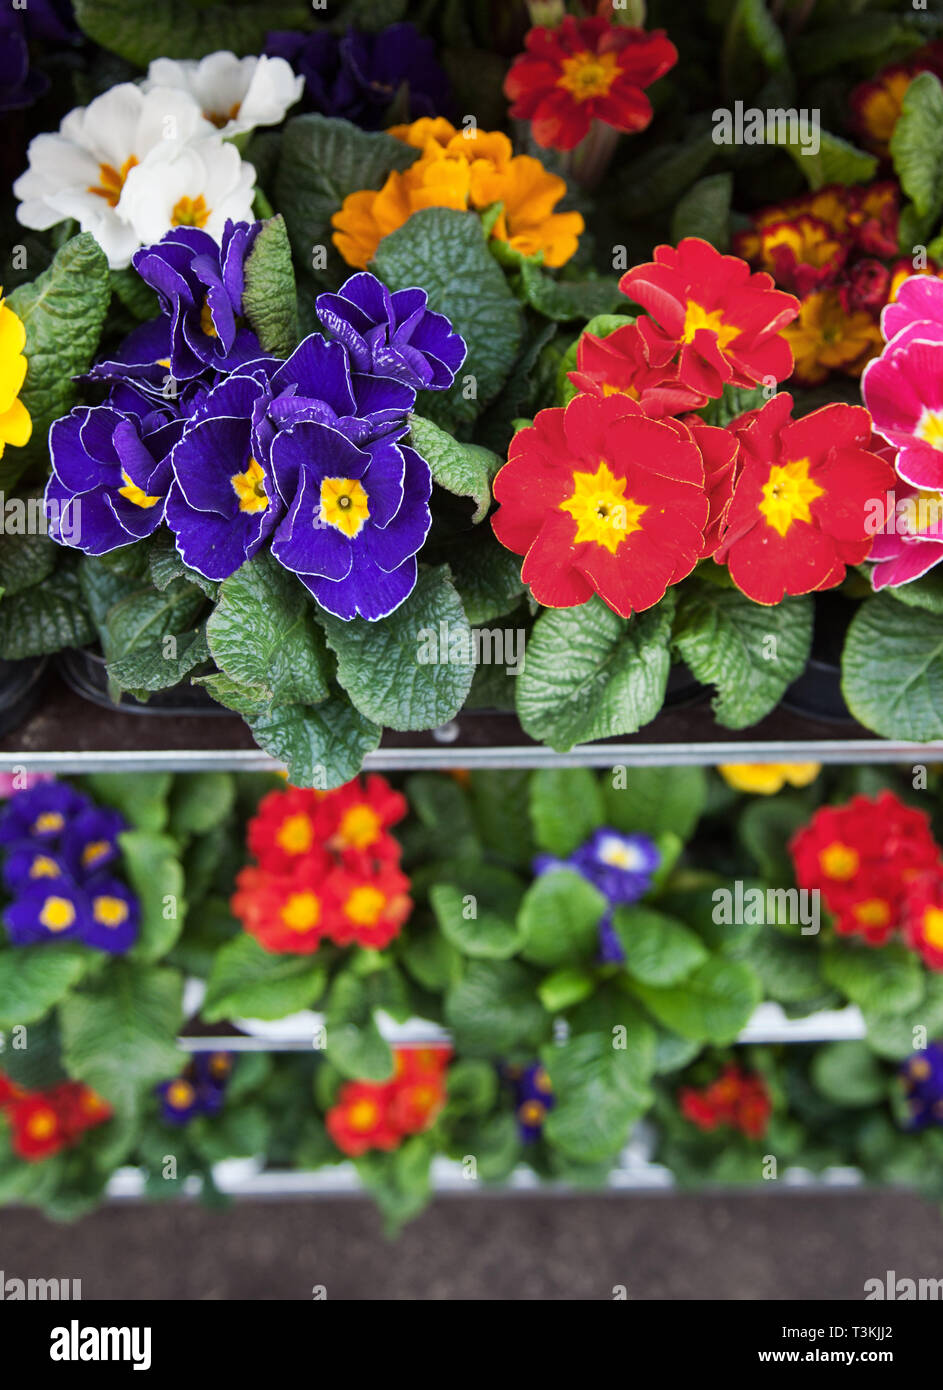 Spring Flowers In The Flower Shop The Garden Pansy Is A Type Of